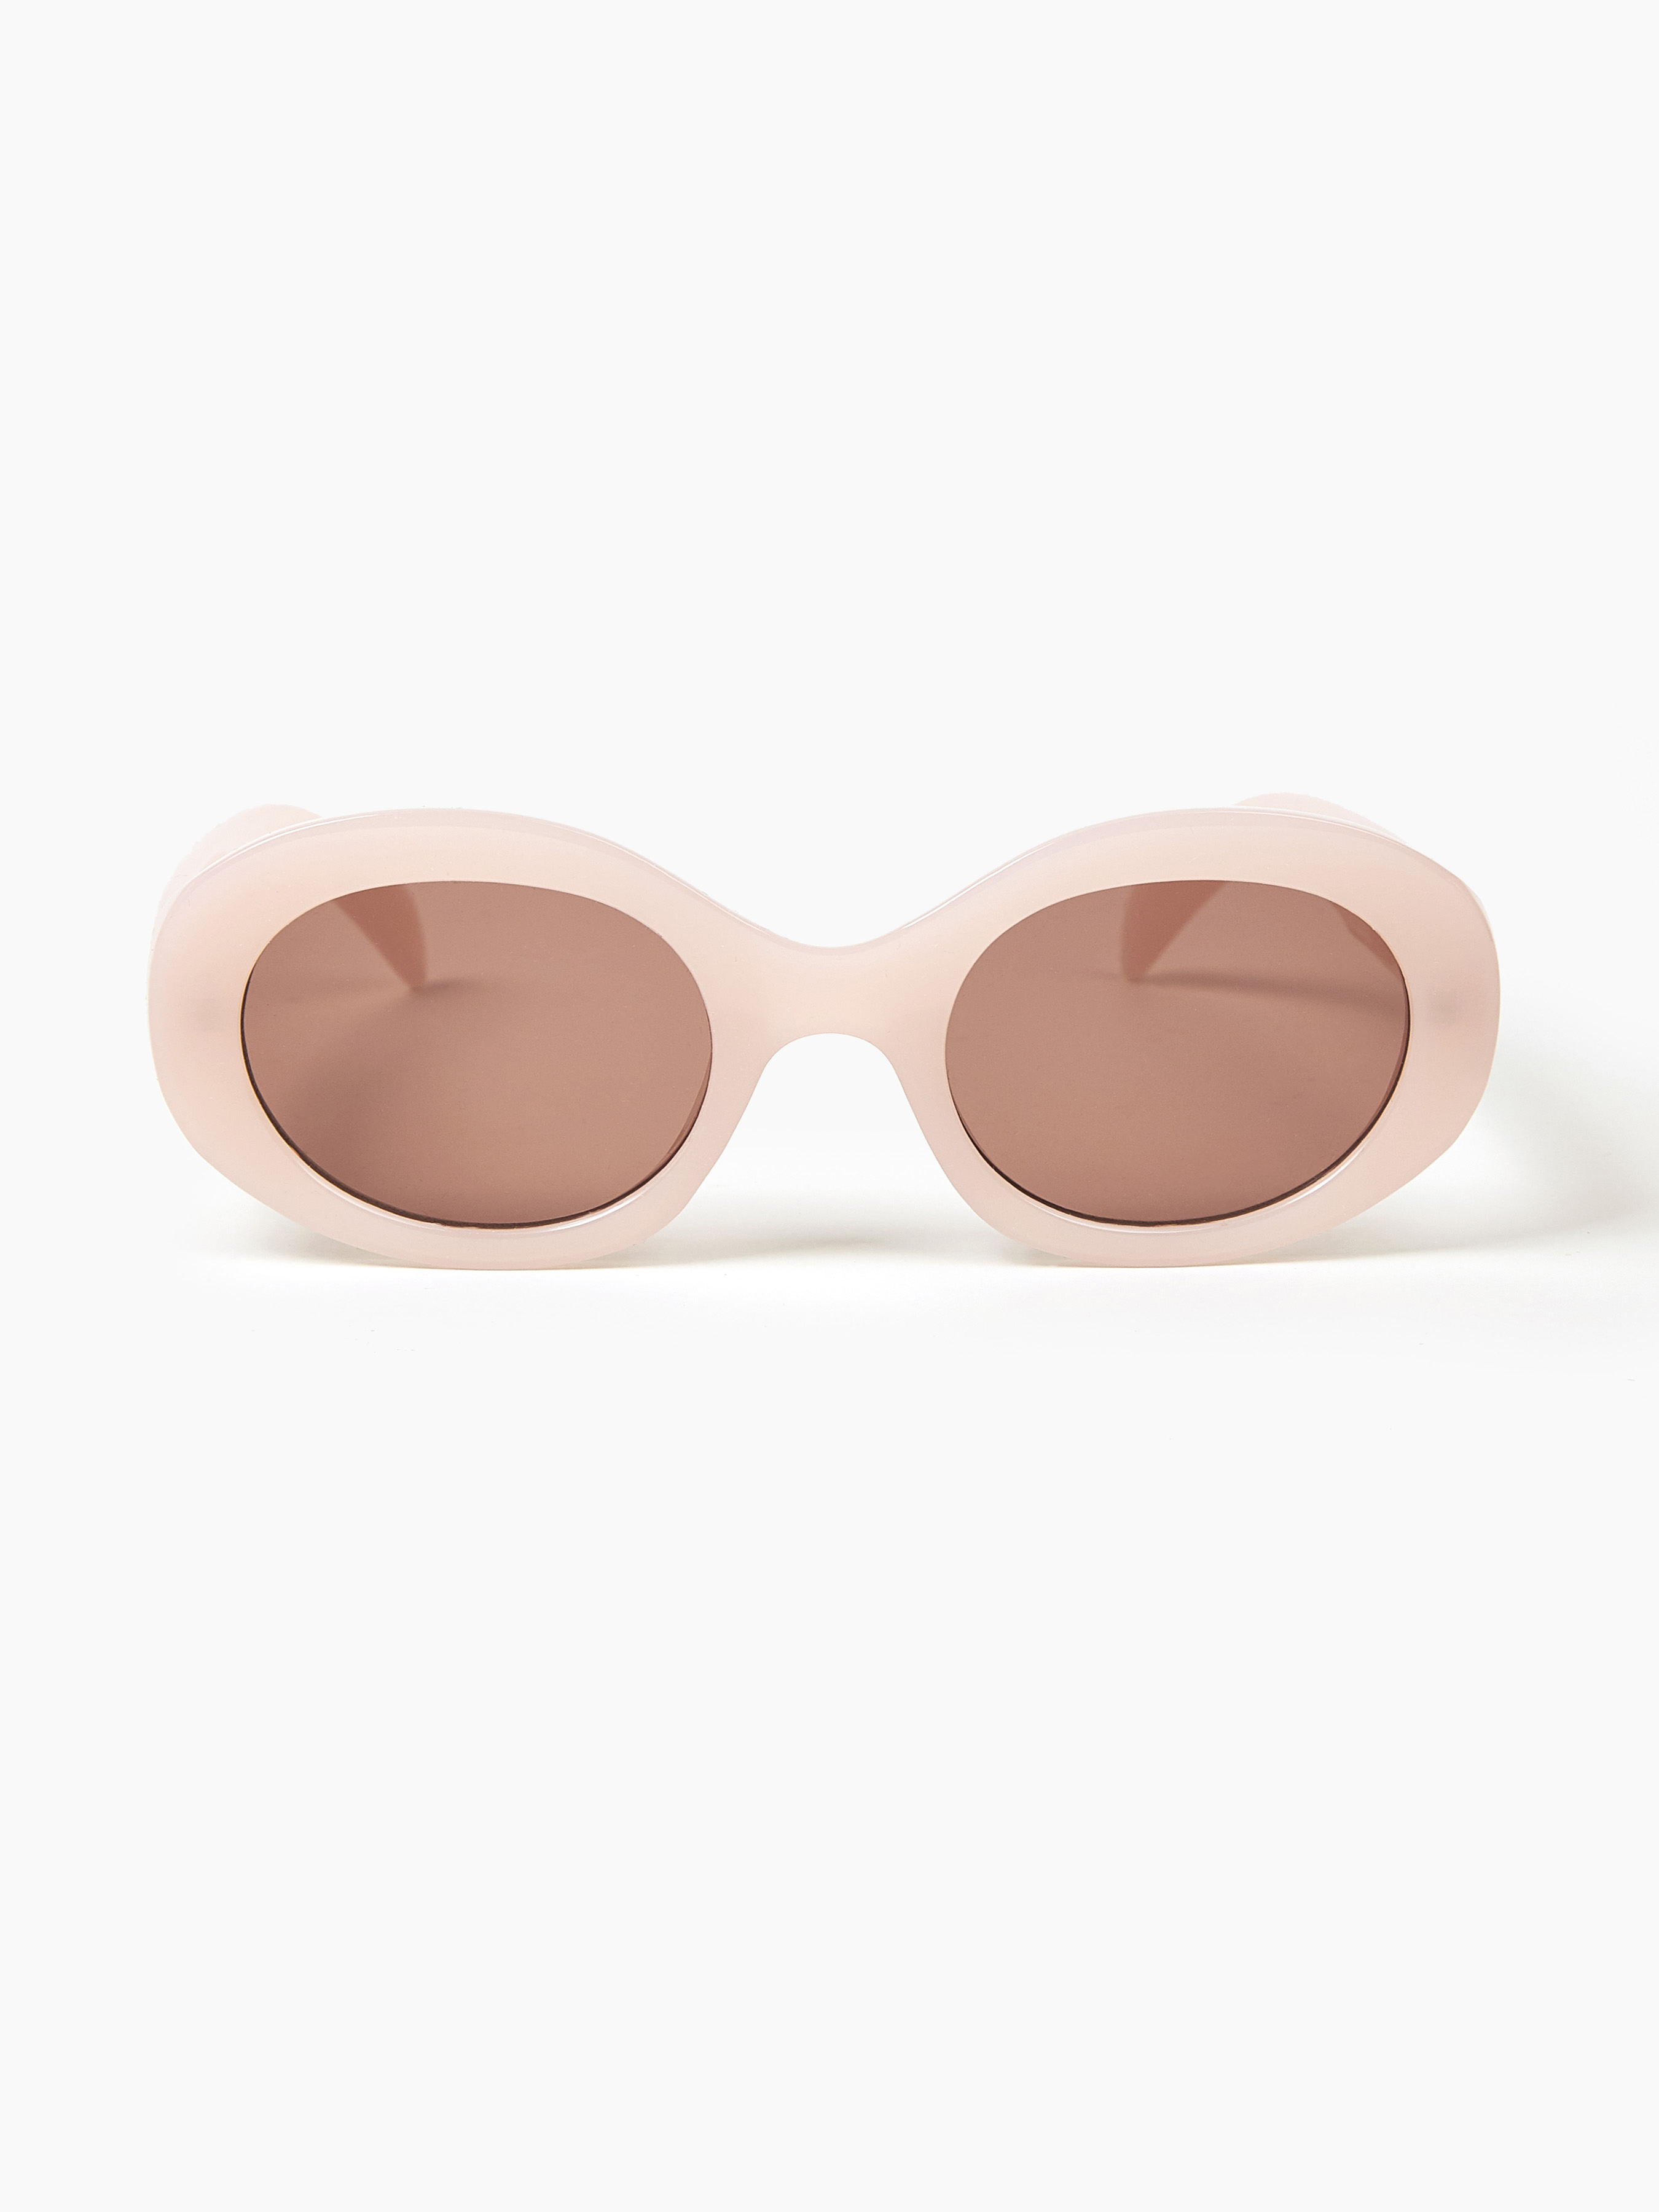 Oval Frame Fashion Glasses with Box - Cider